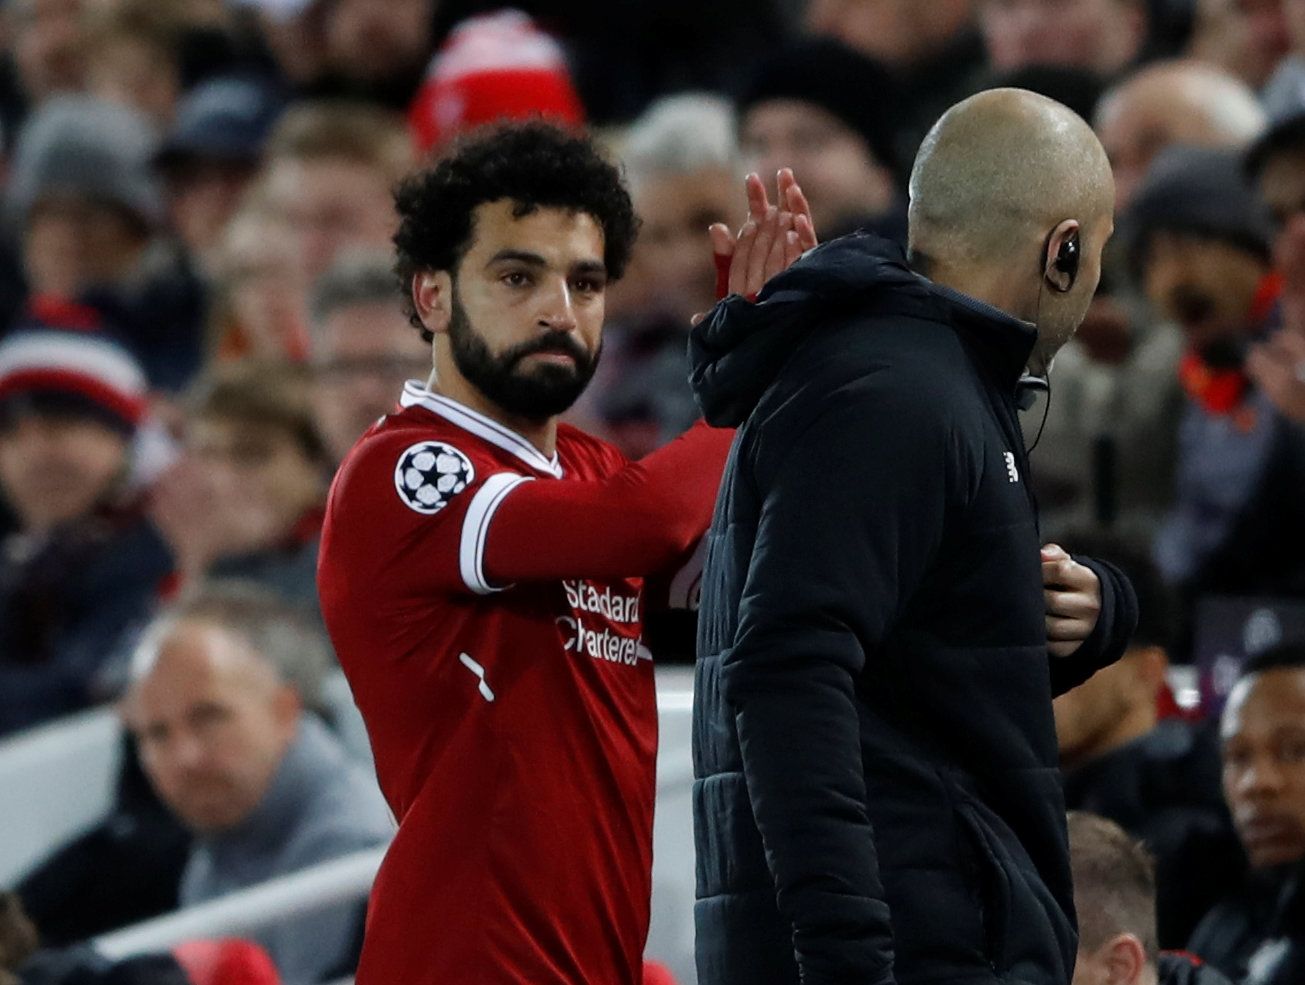 Mohamed Salah comes off injured in the Champions League semi-final